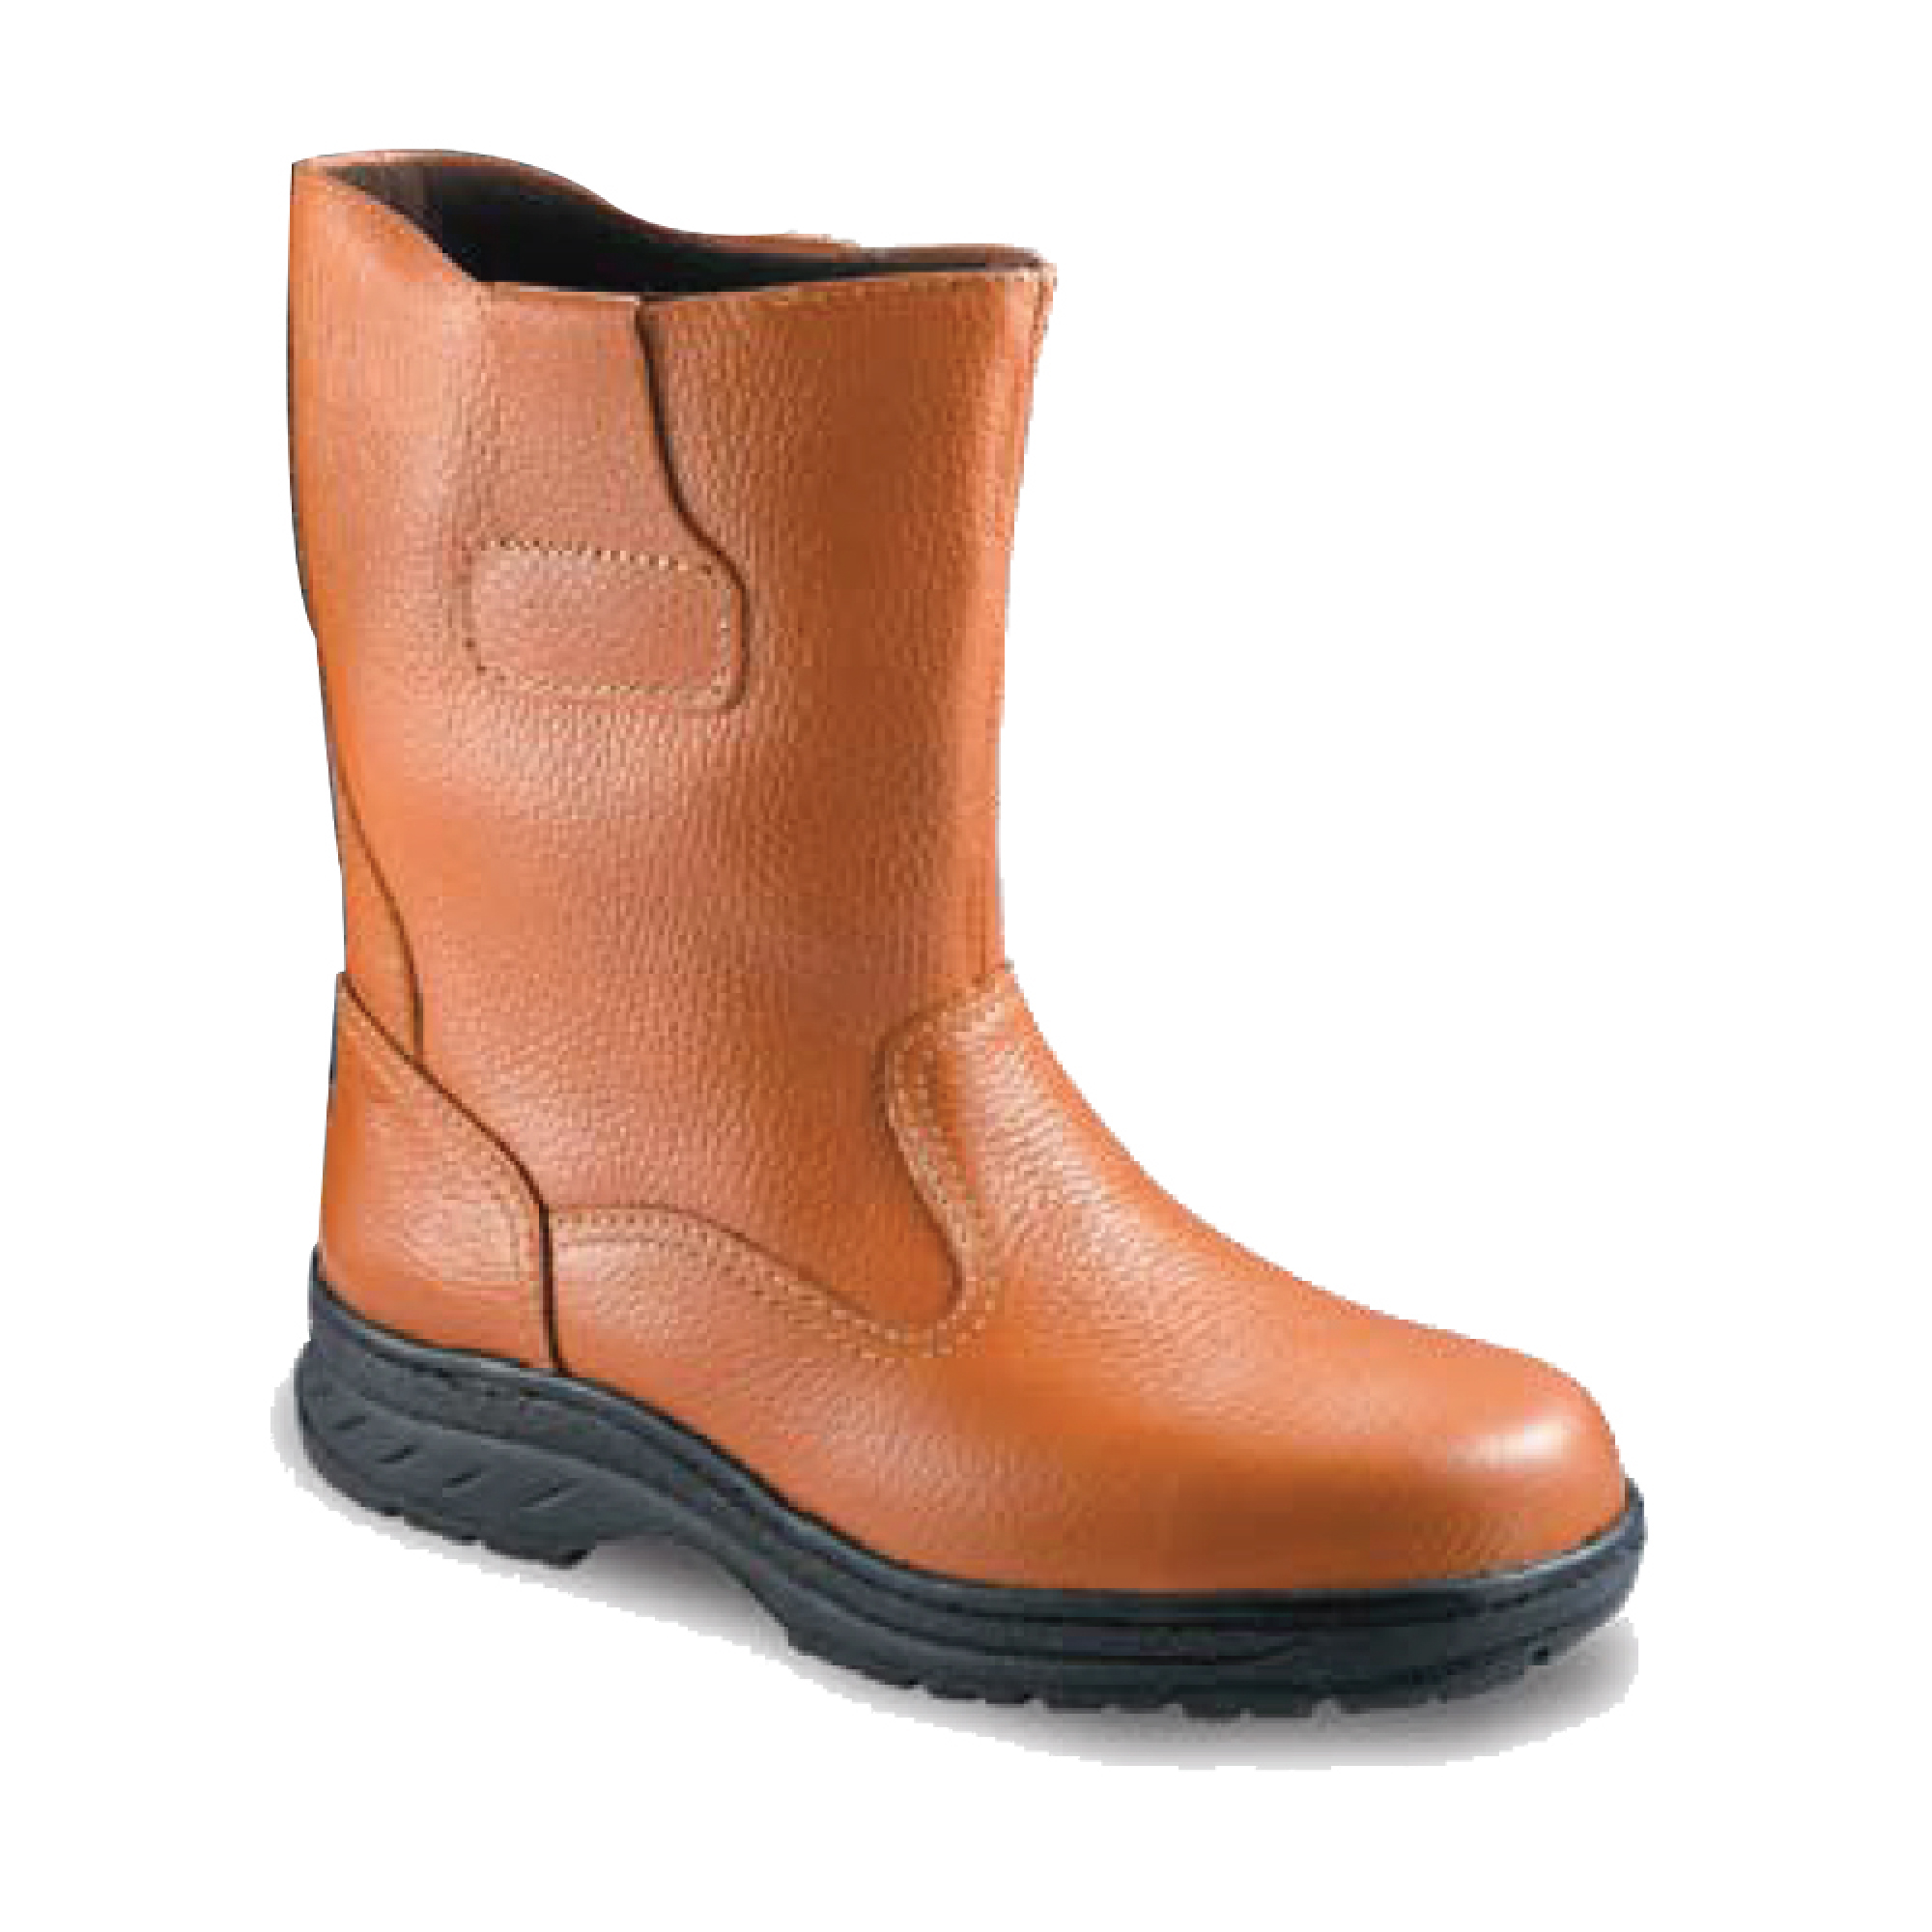 M93309-22 Safety Gumboots